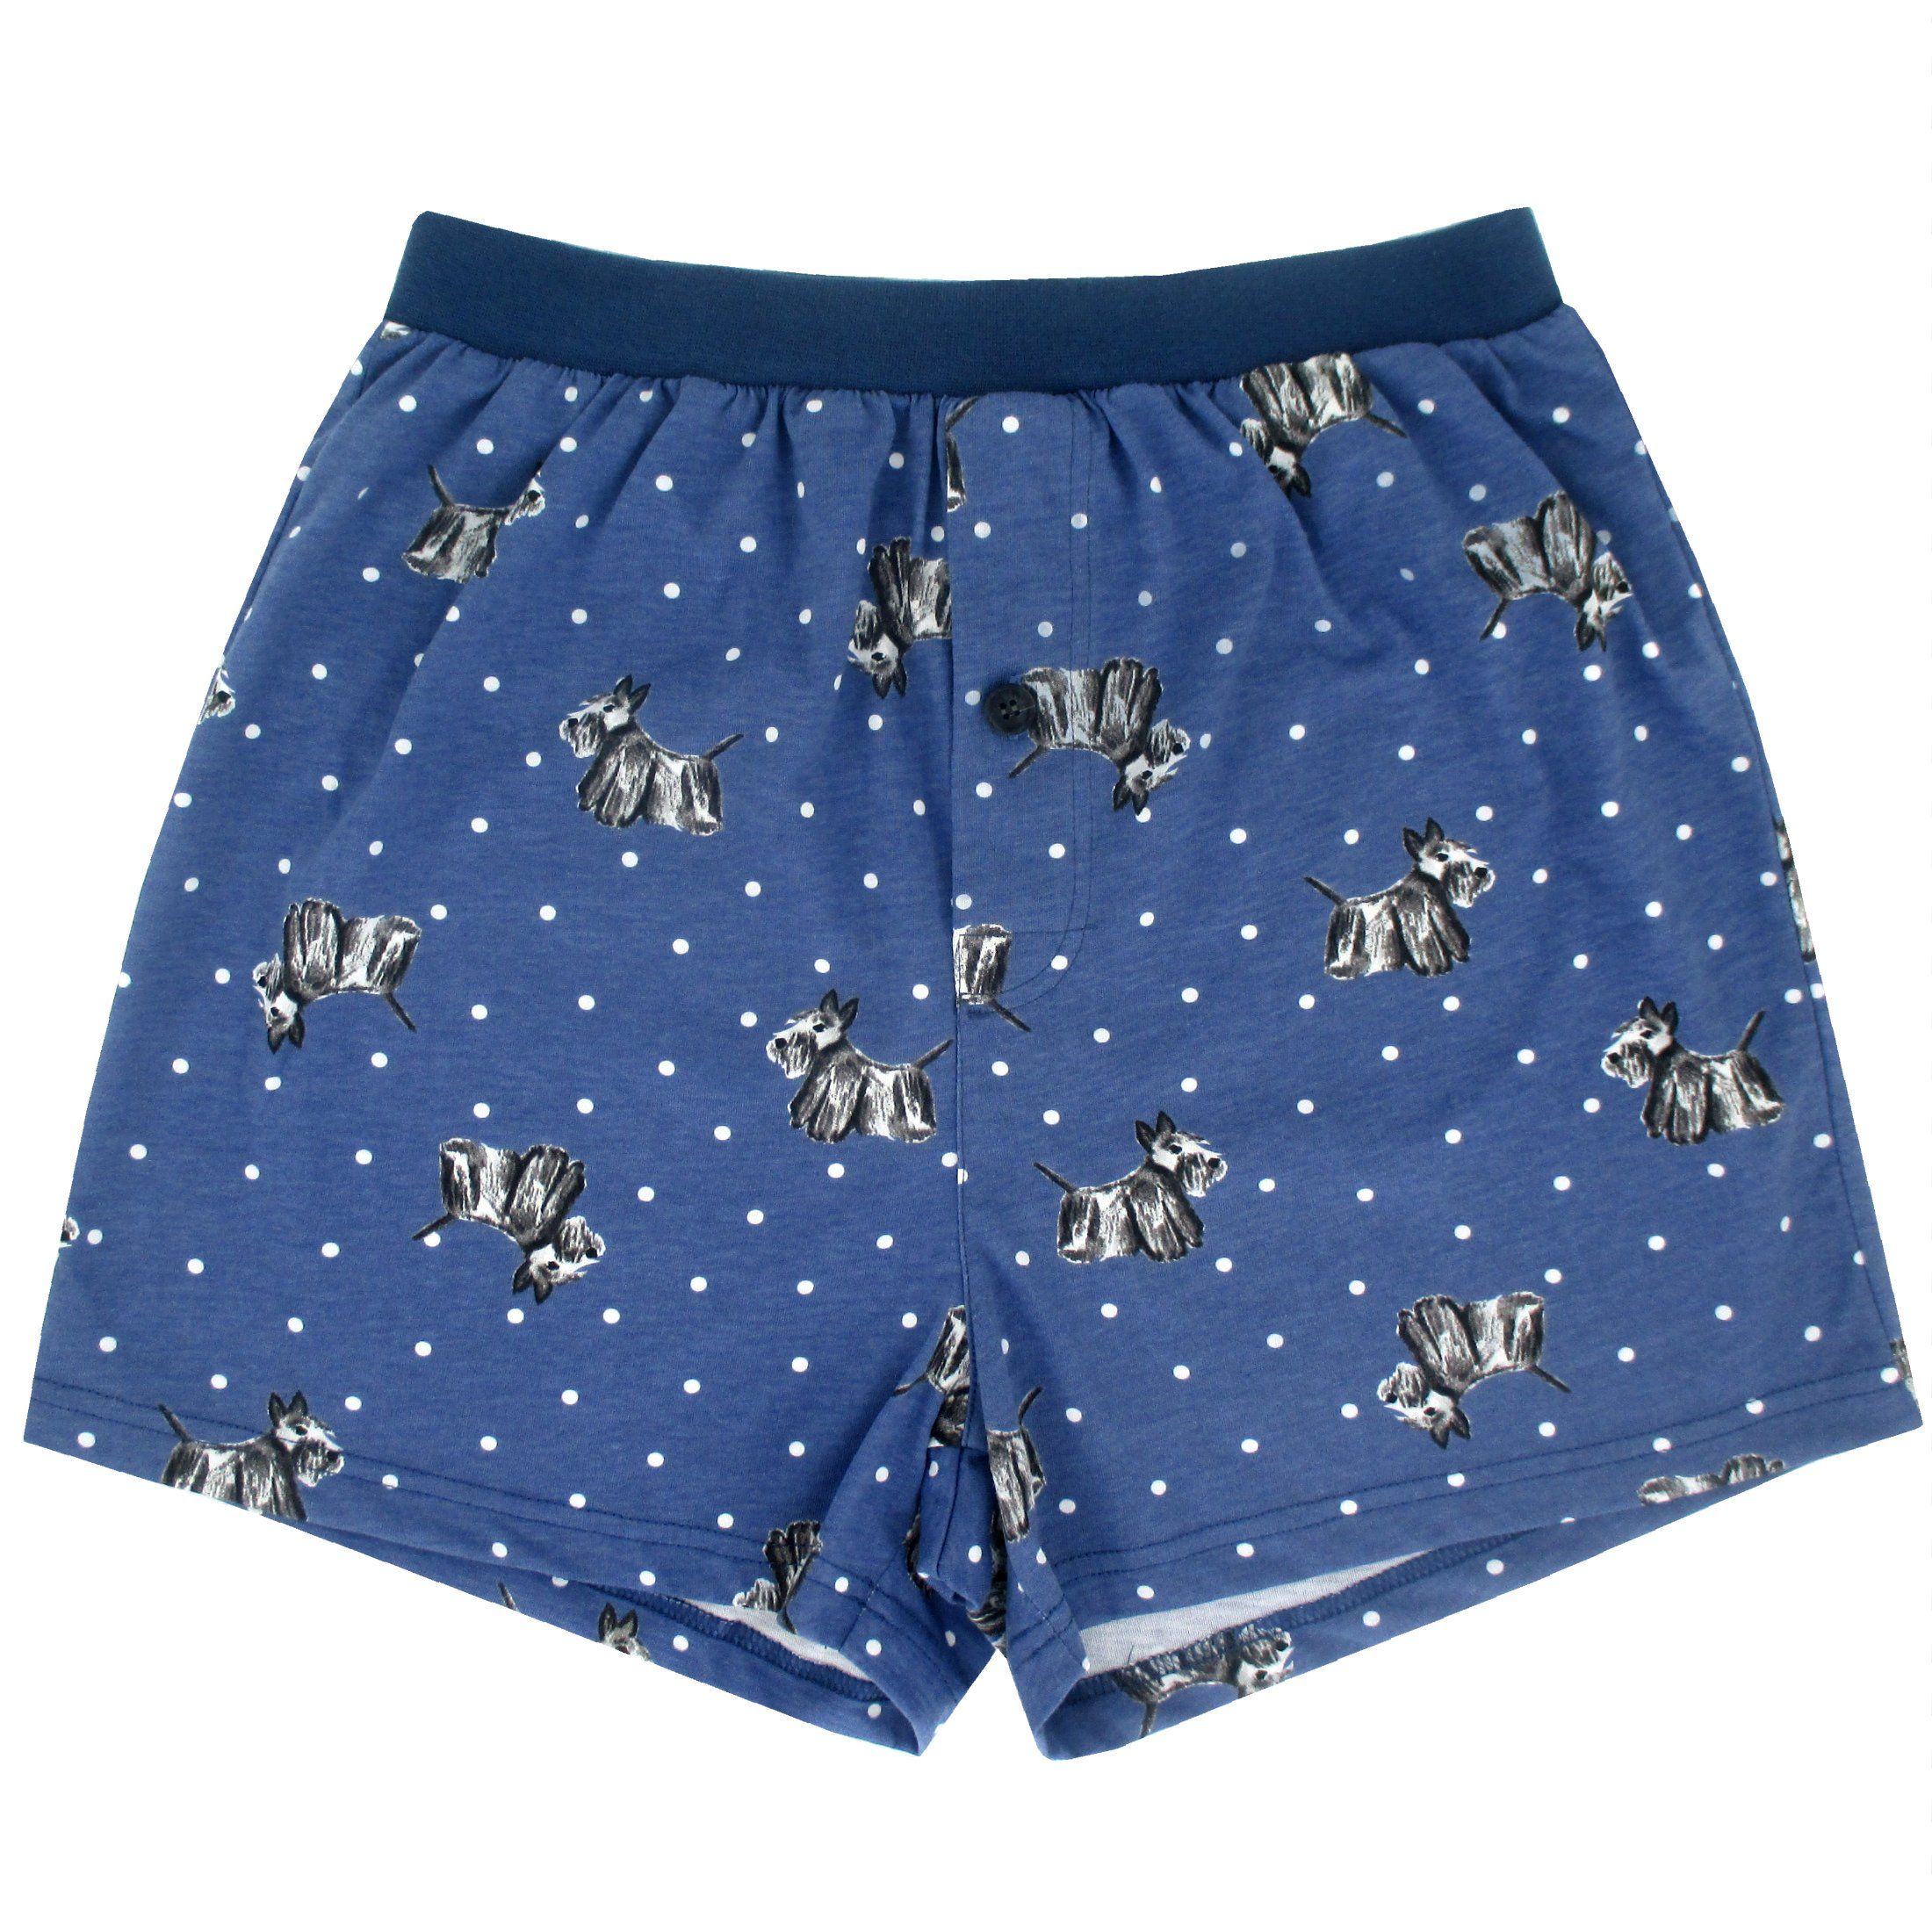 Polka Dotted Dog Schnauzer All Over Print Boxer Shorts for Men